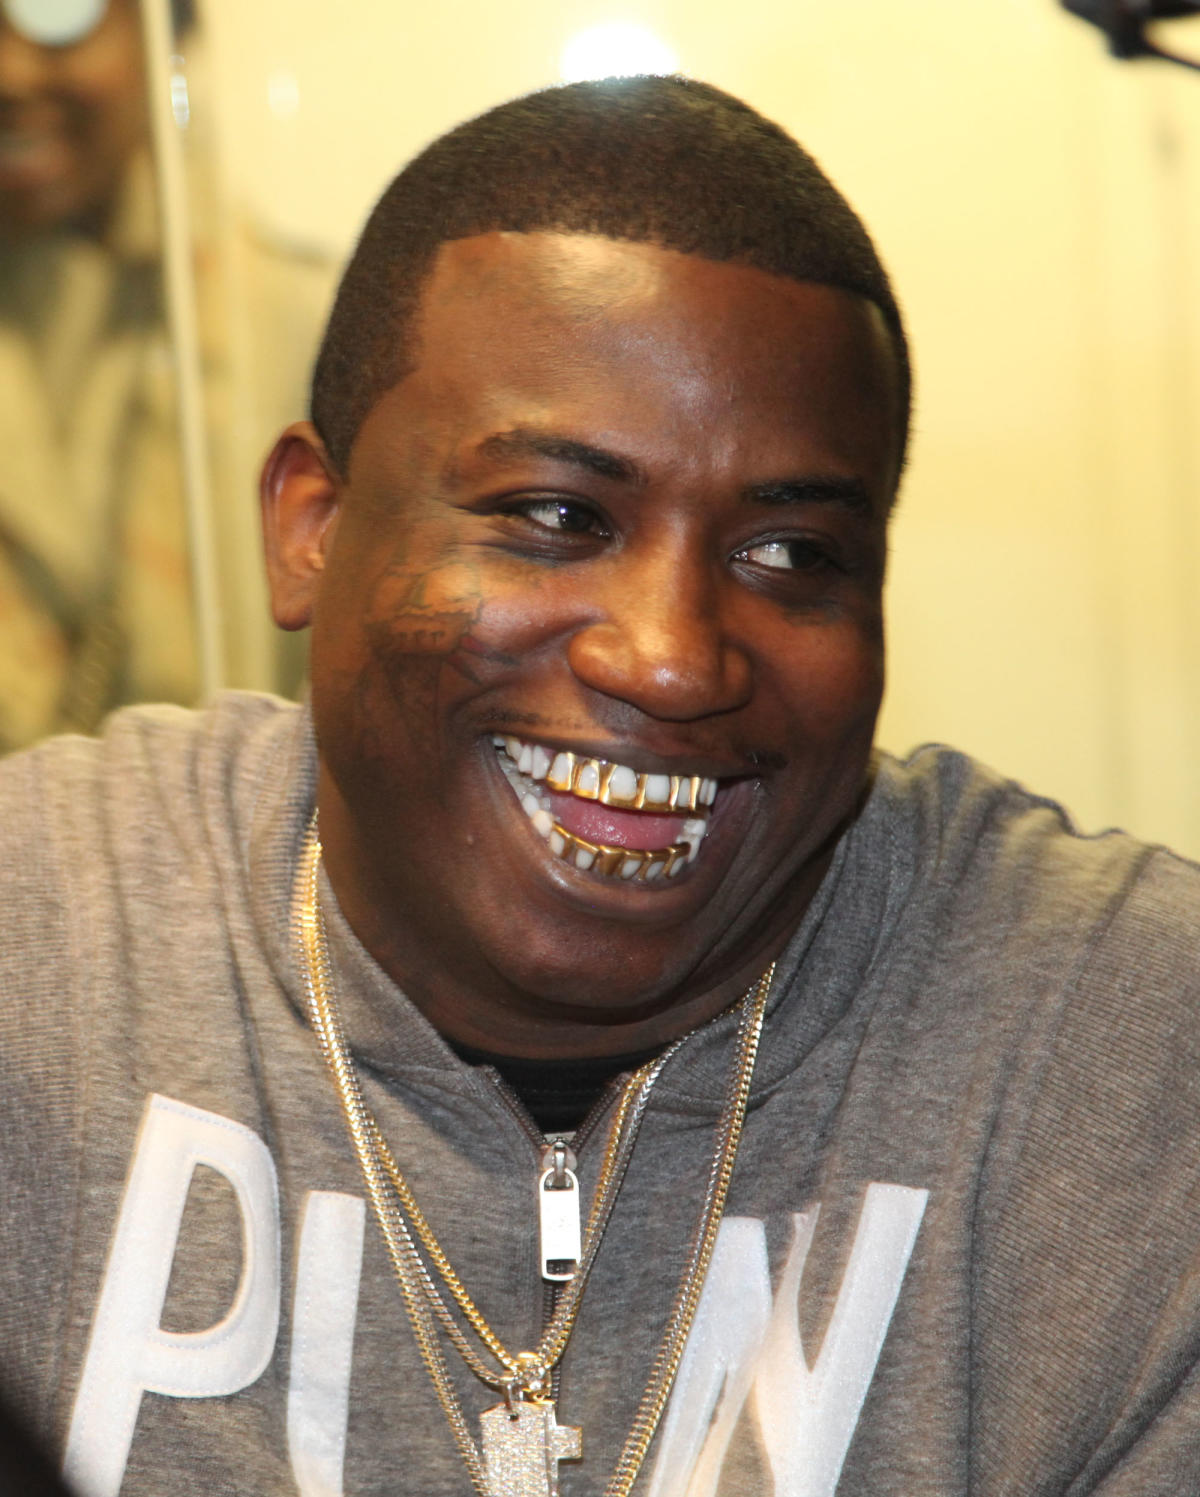 The Aftermath: Did Gucci Mane's Twitter Account Get Hacked?